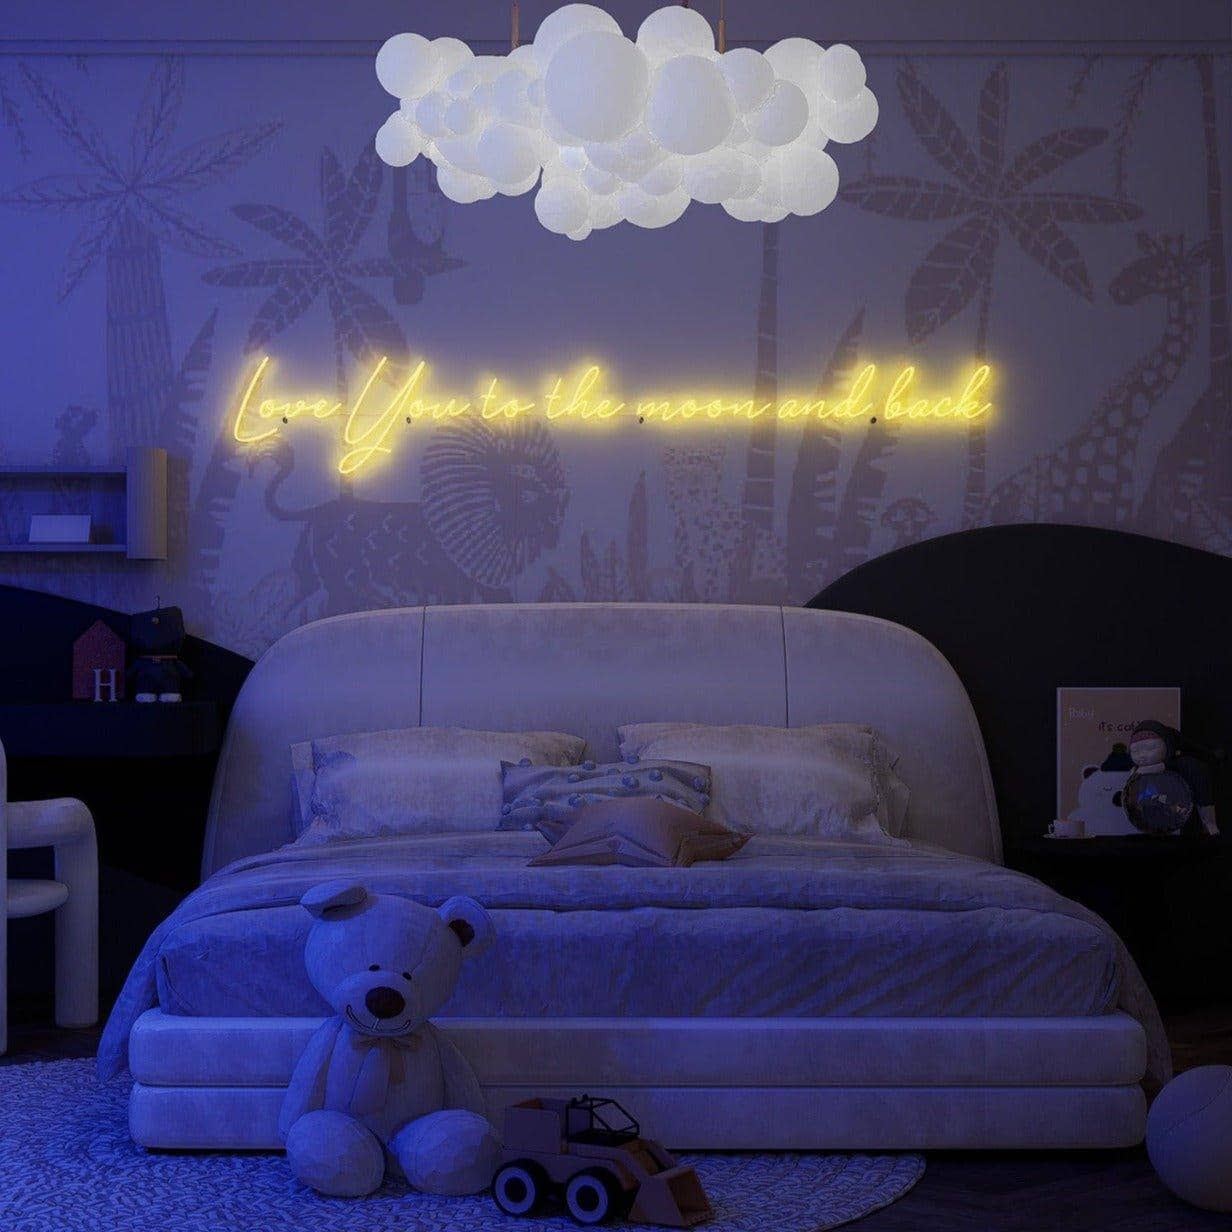 night-shot-of-lit-yellow-neon-lights-hanging-on-display-in-bedroom-love-you-to-the-moon-and-back